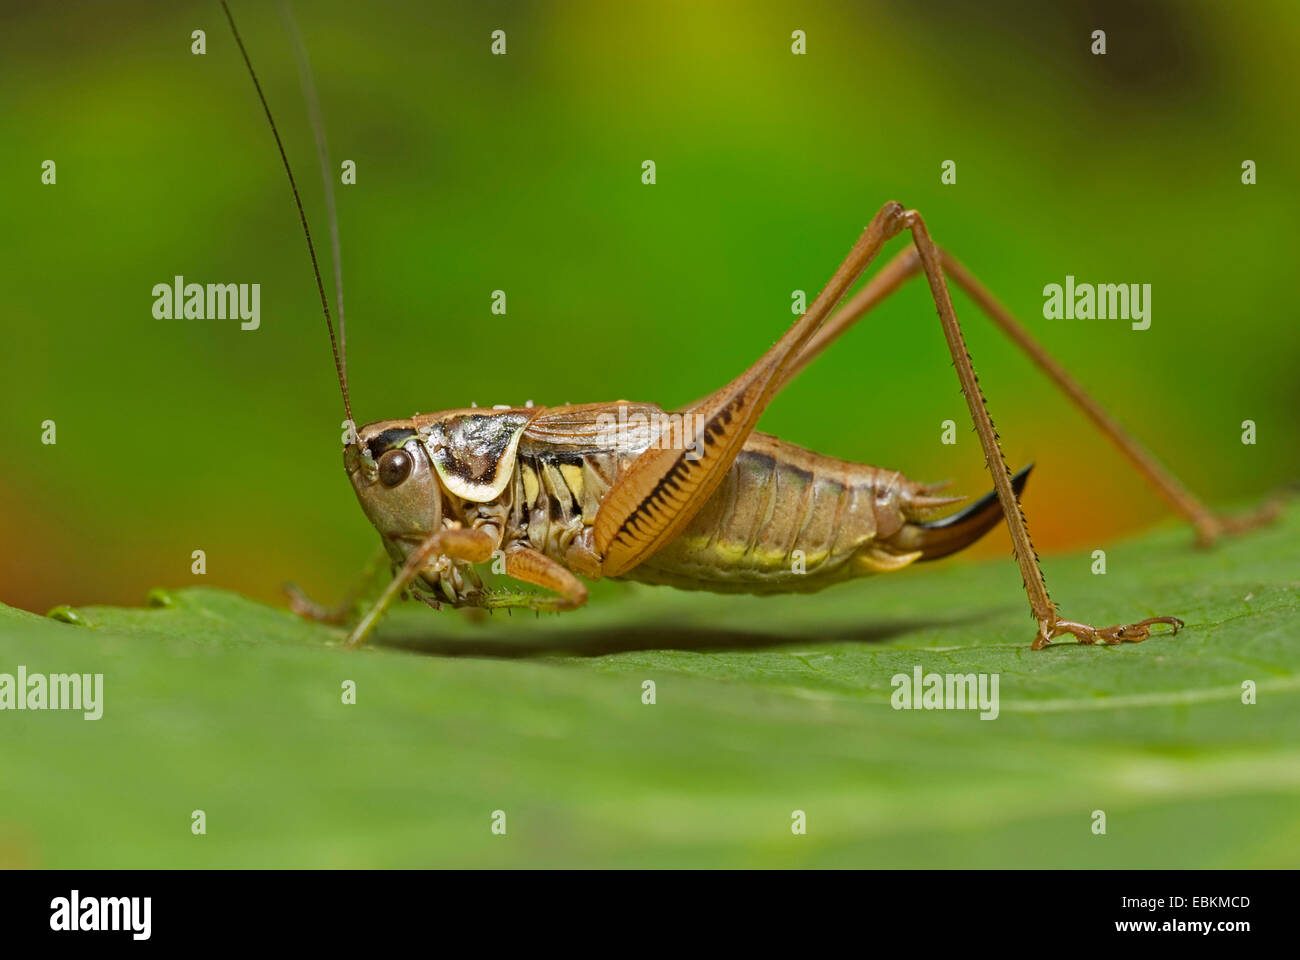 Roesel's Metrioptera roeselii (bushcricket), femme assise sur une feuille, Allemagne Banque D'Images